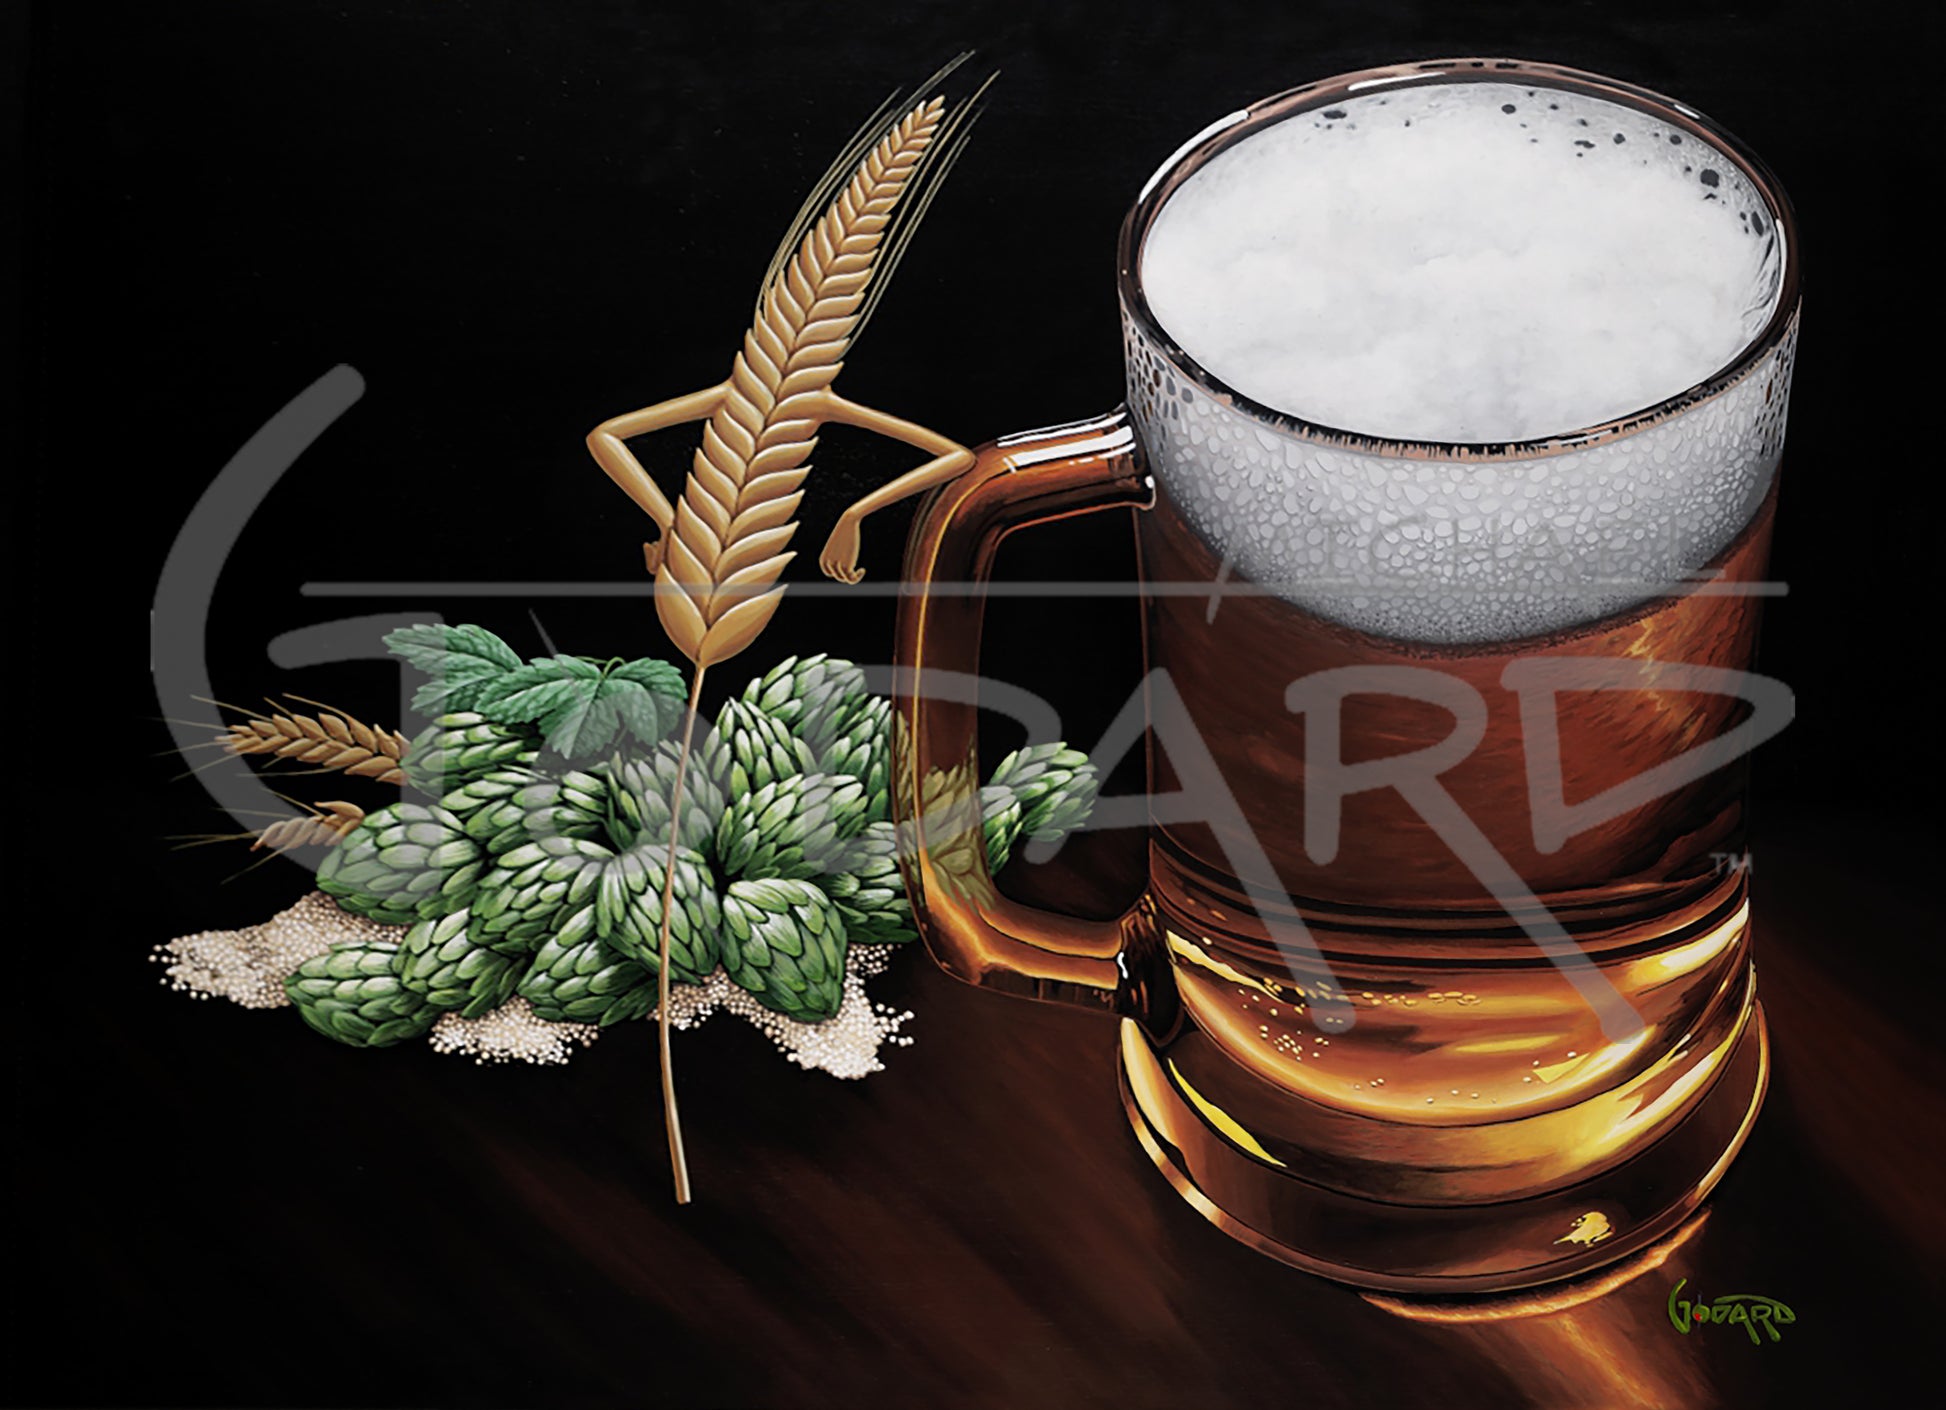 Michael Godard "Beer Necessities" Limited Edition Canvas Giclee